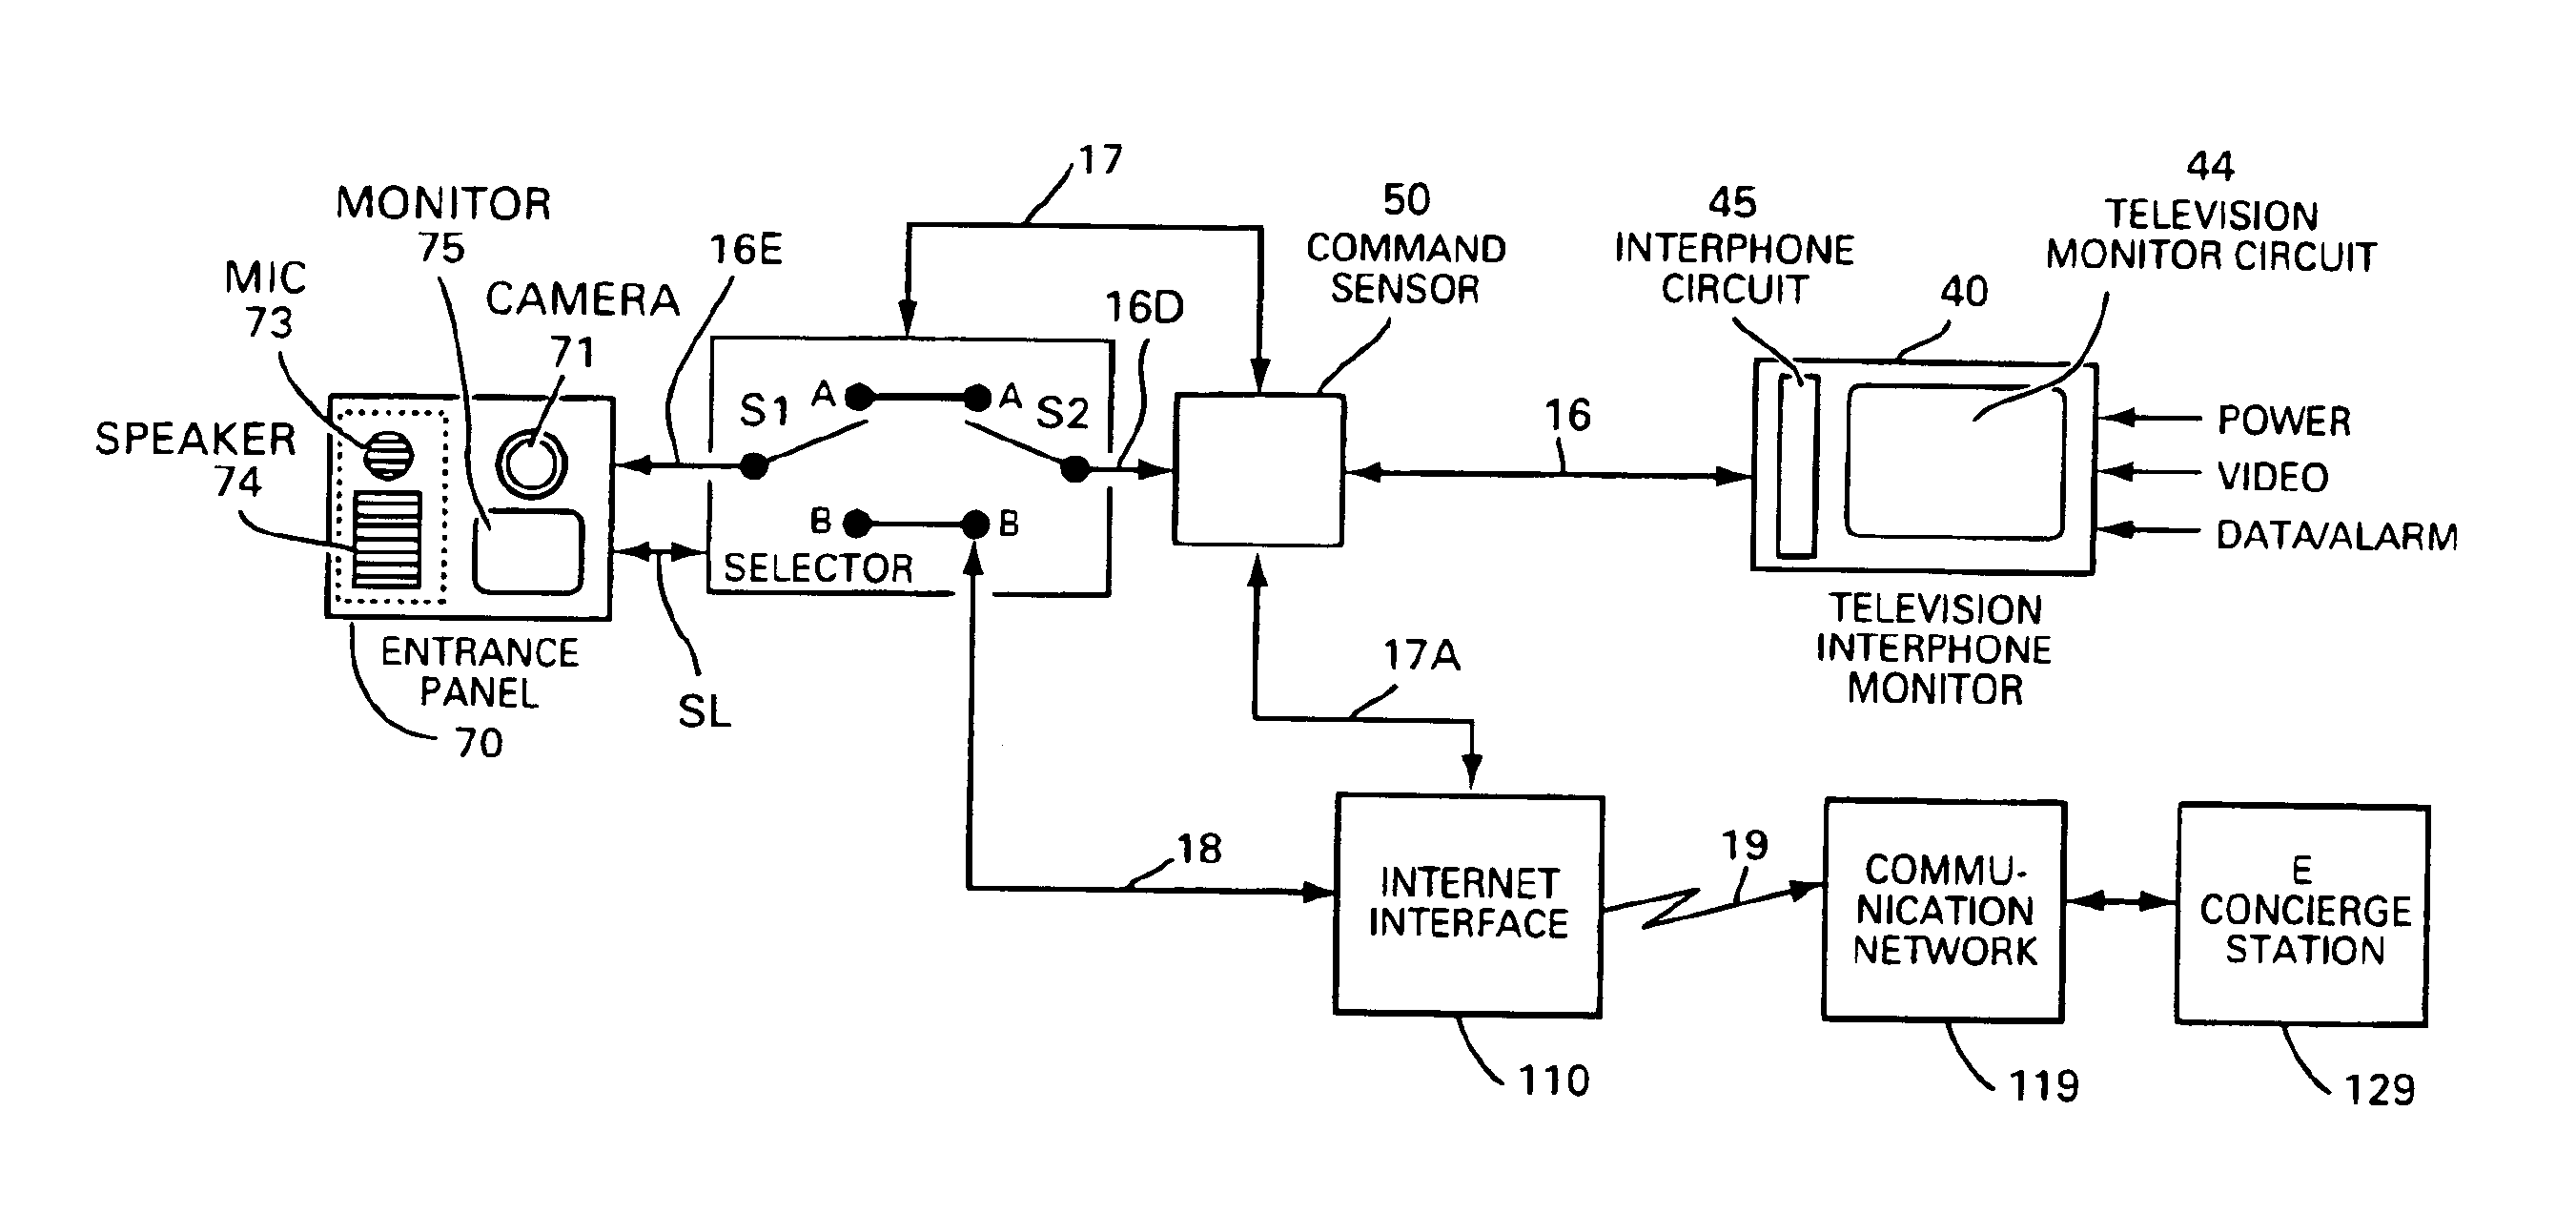 Method and apparatus for connecting a television interphone monitor system to a concierge station over the internet